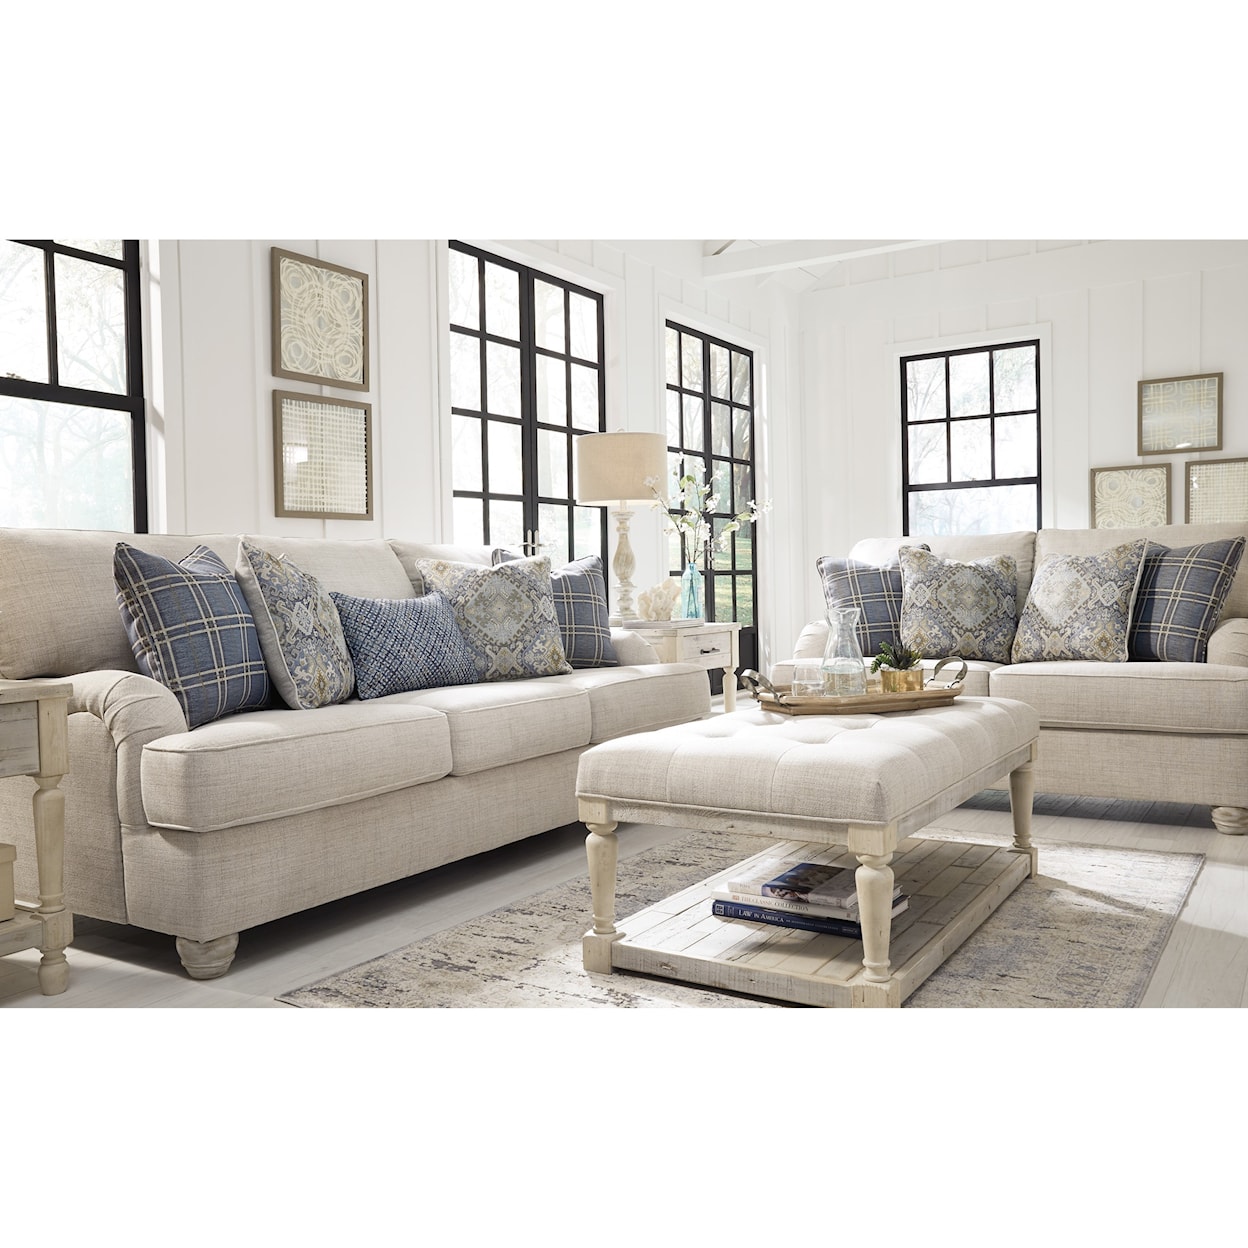 Benchcraft by Ashley Traemore 2-Piece Living Room Group